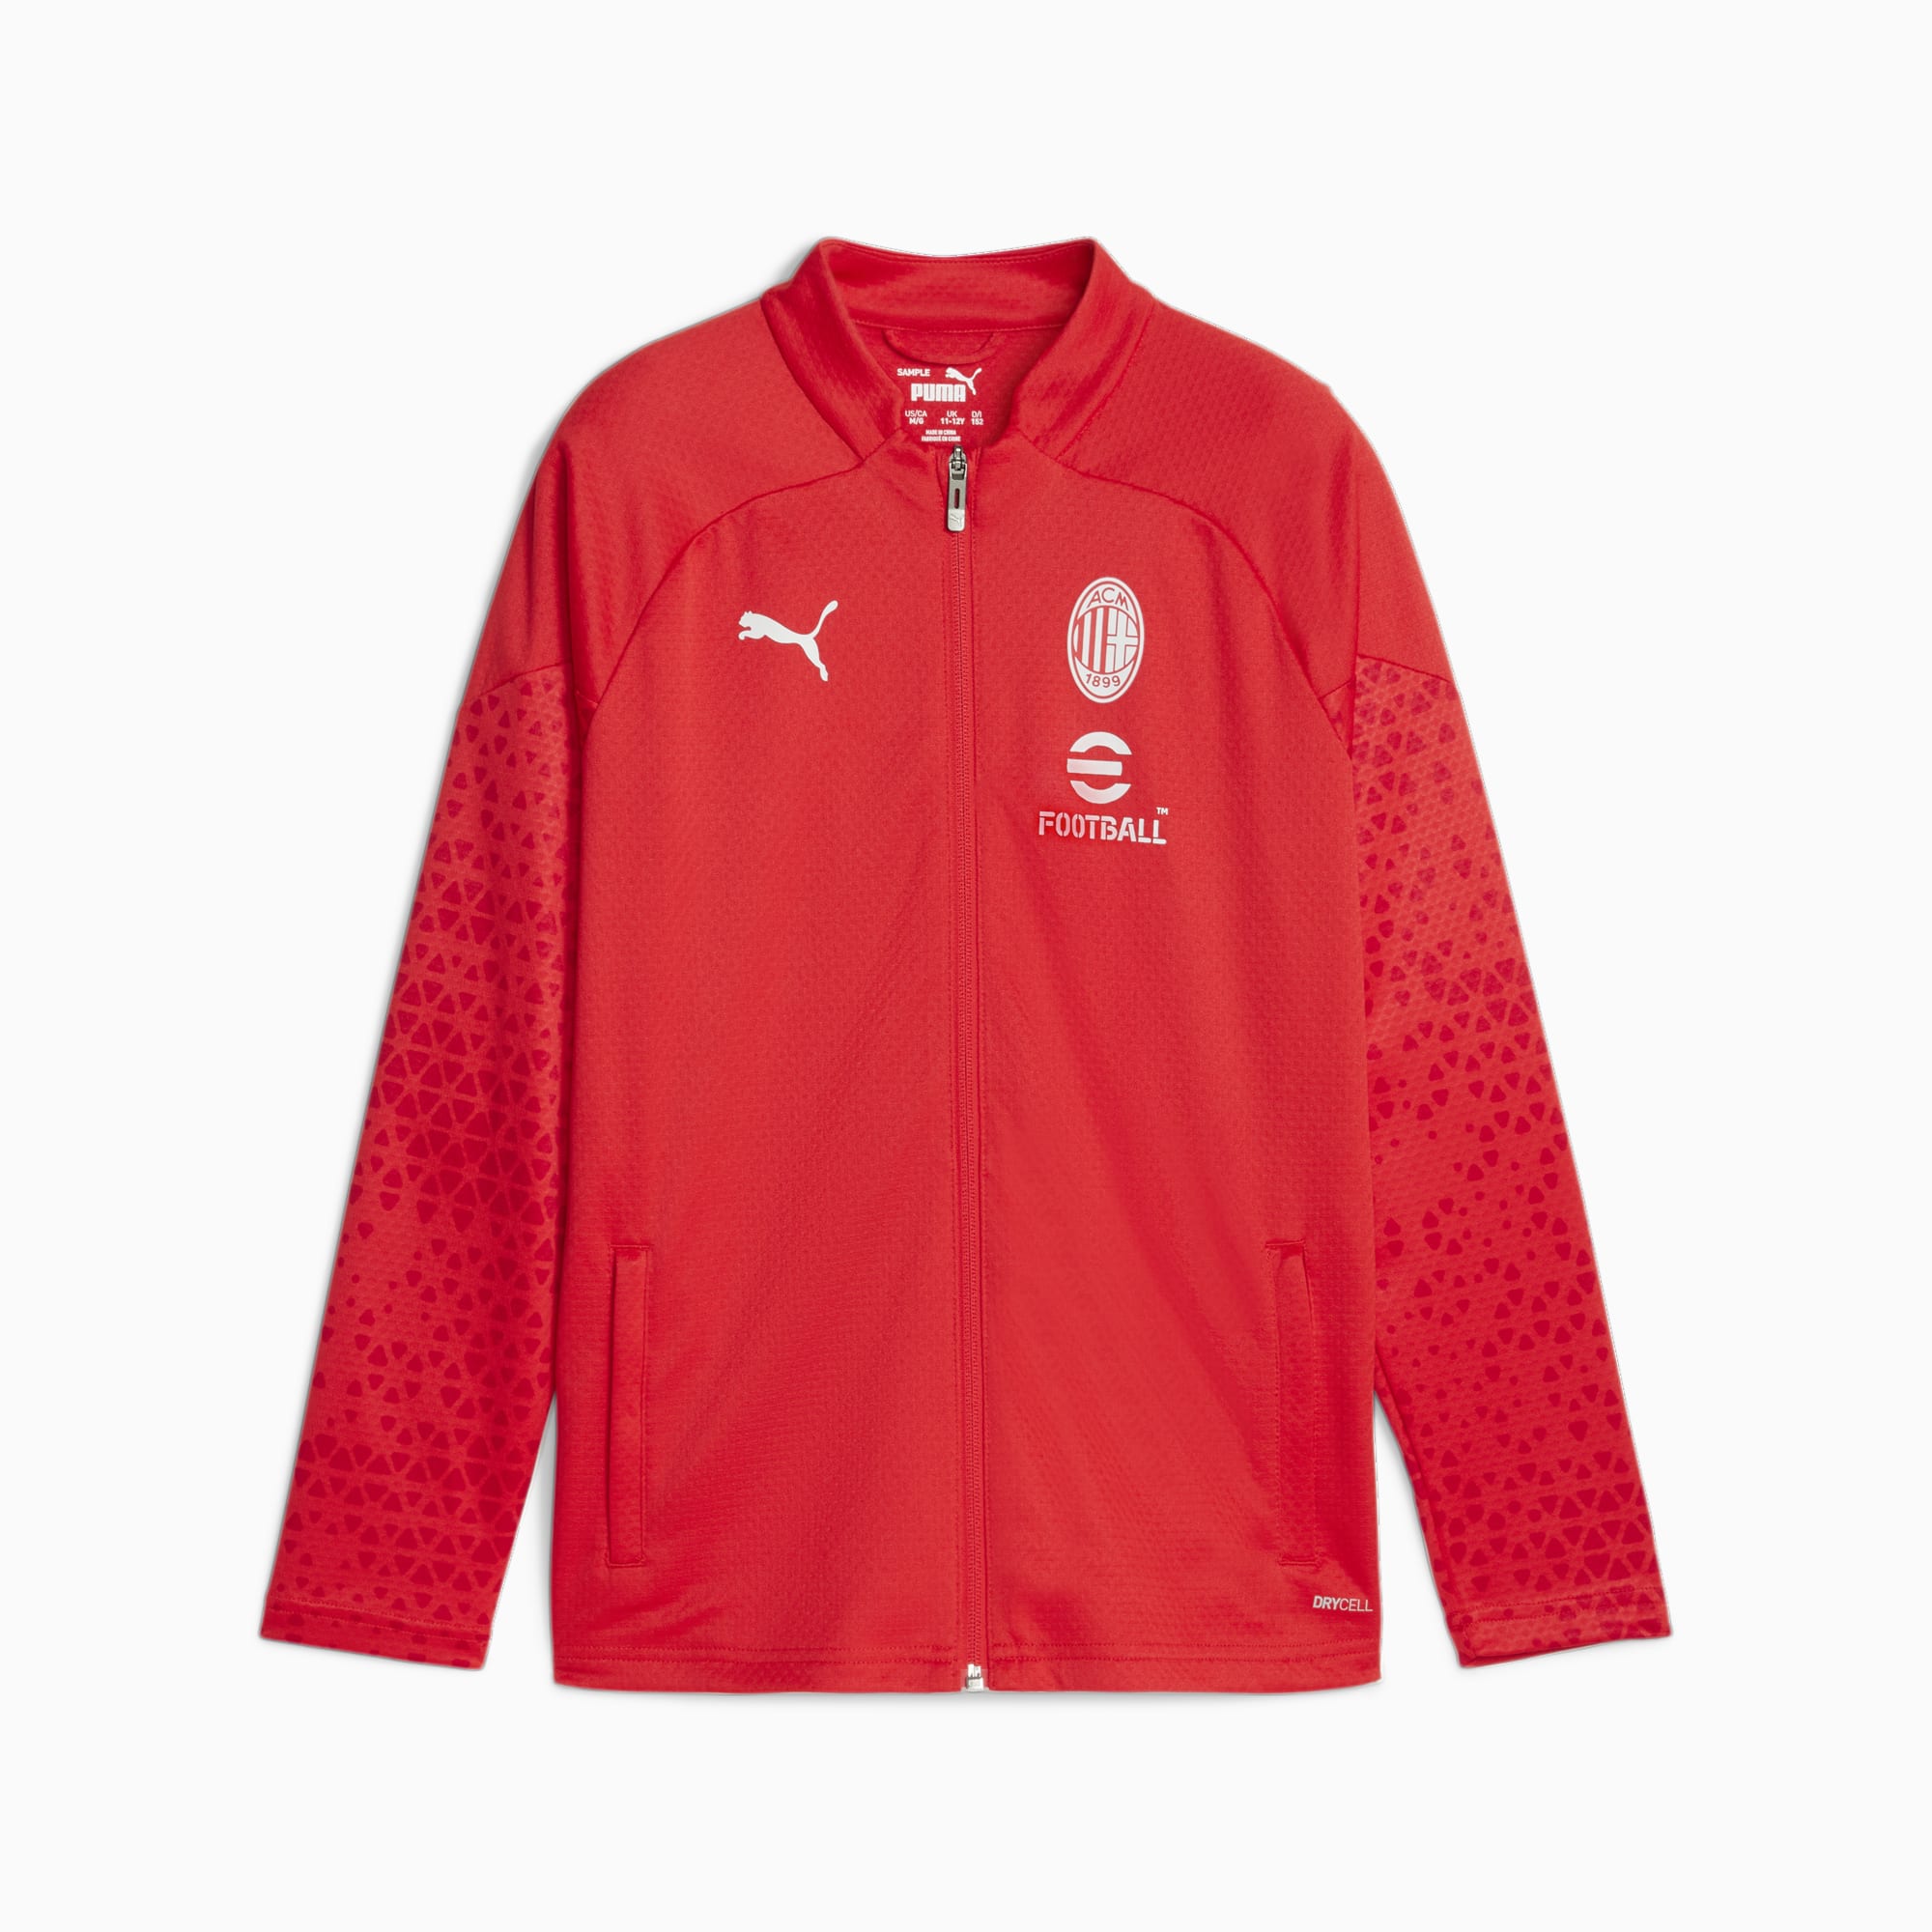 PUMA AC Milan Football Youth Training Jacket, For All Time Red/Feather Grey